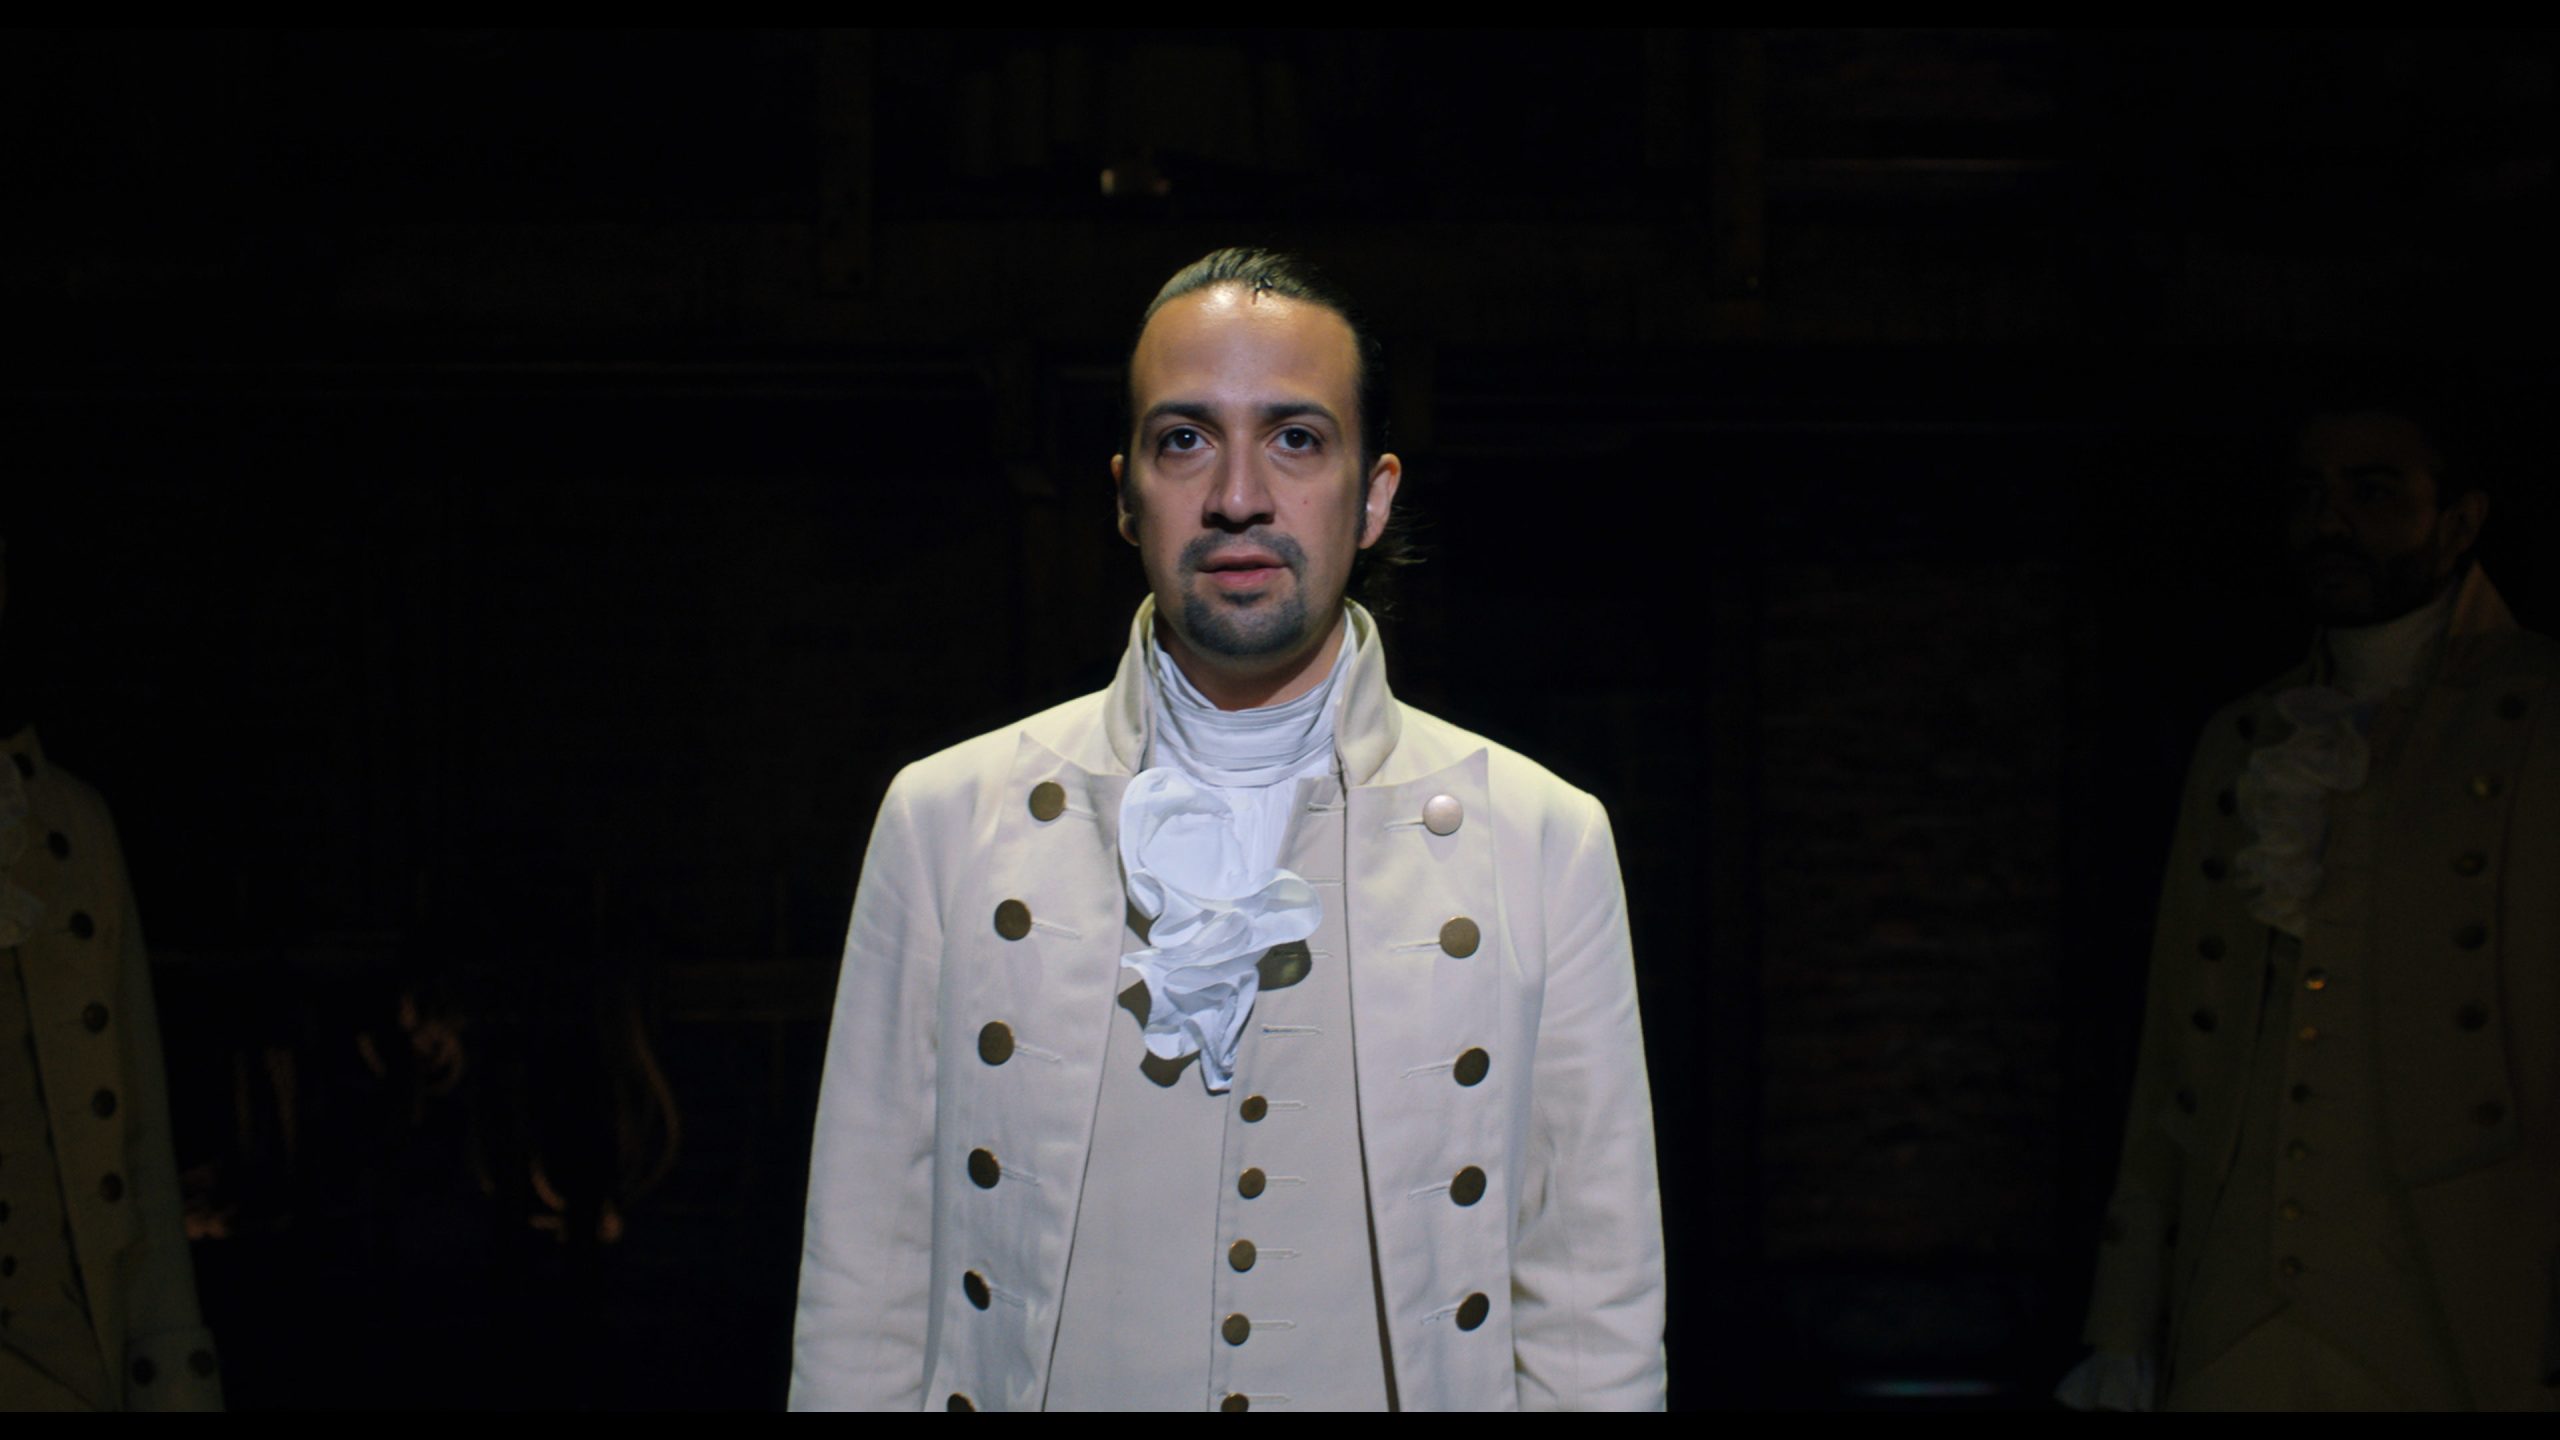 Hamilton Benefits From Category Fraud At Emmys